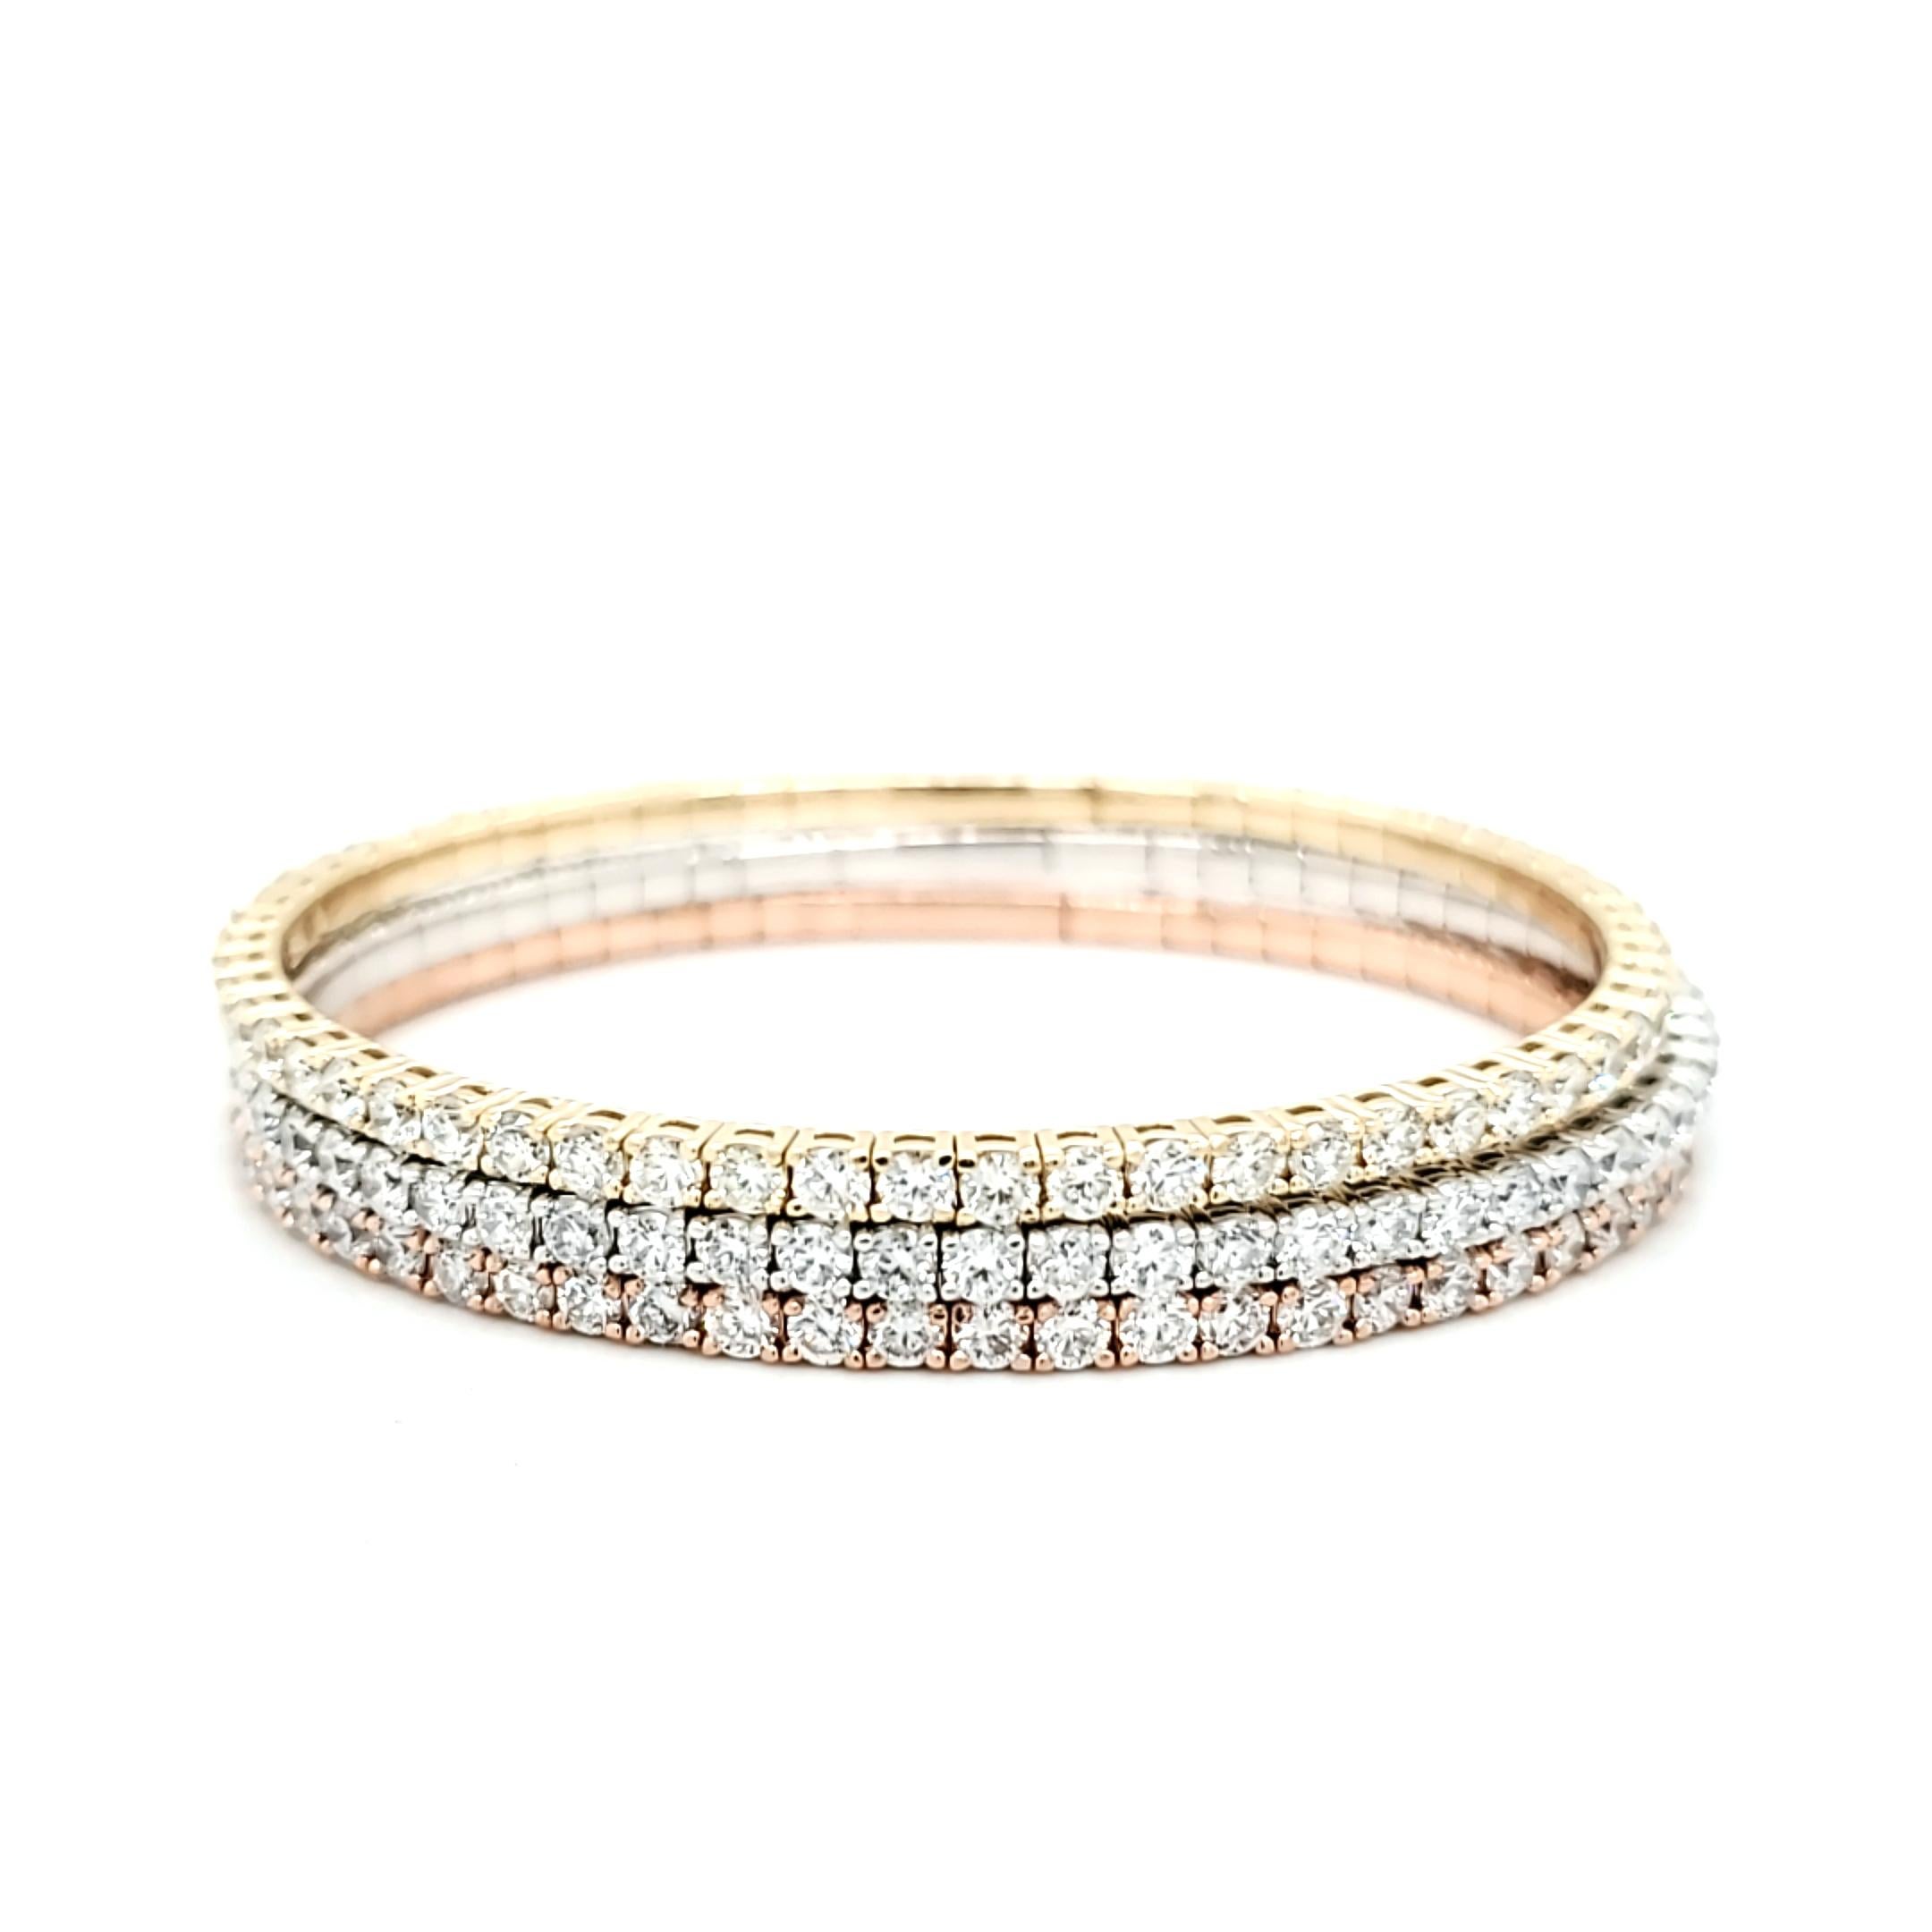 14K Gold Diamond Bangles. Available in Rose Gold, Yellow Gold and White Gold. Each bangle set with 4.50 carats of fine white round diamonds. Each Bracelet has some flex movement once opened for easy on and off the wrist. Ee use 14K gold wiring